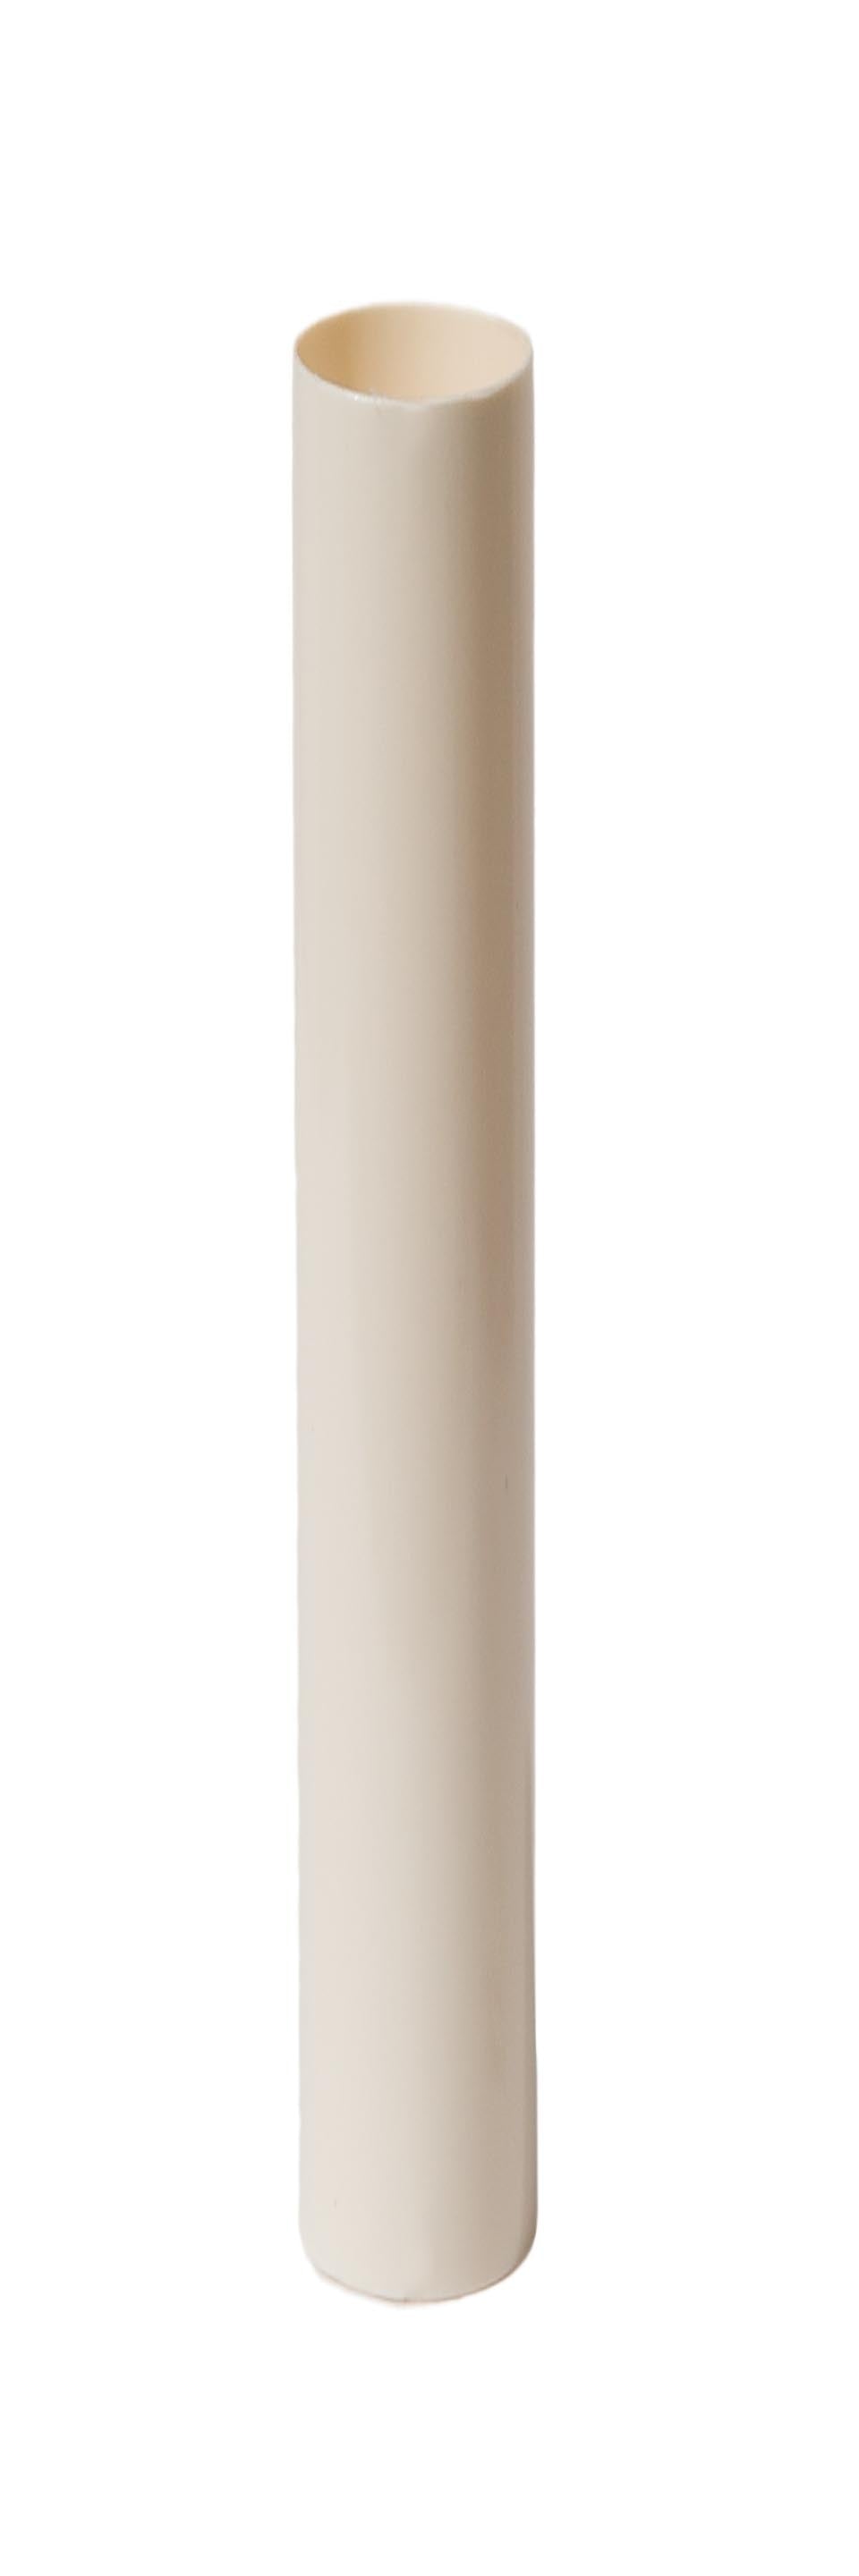 CANDELABRA Size Cream Color Plastic Candle Cover - Choice: 2", 3", 4", 6", or 8" ht.